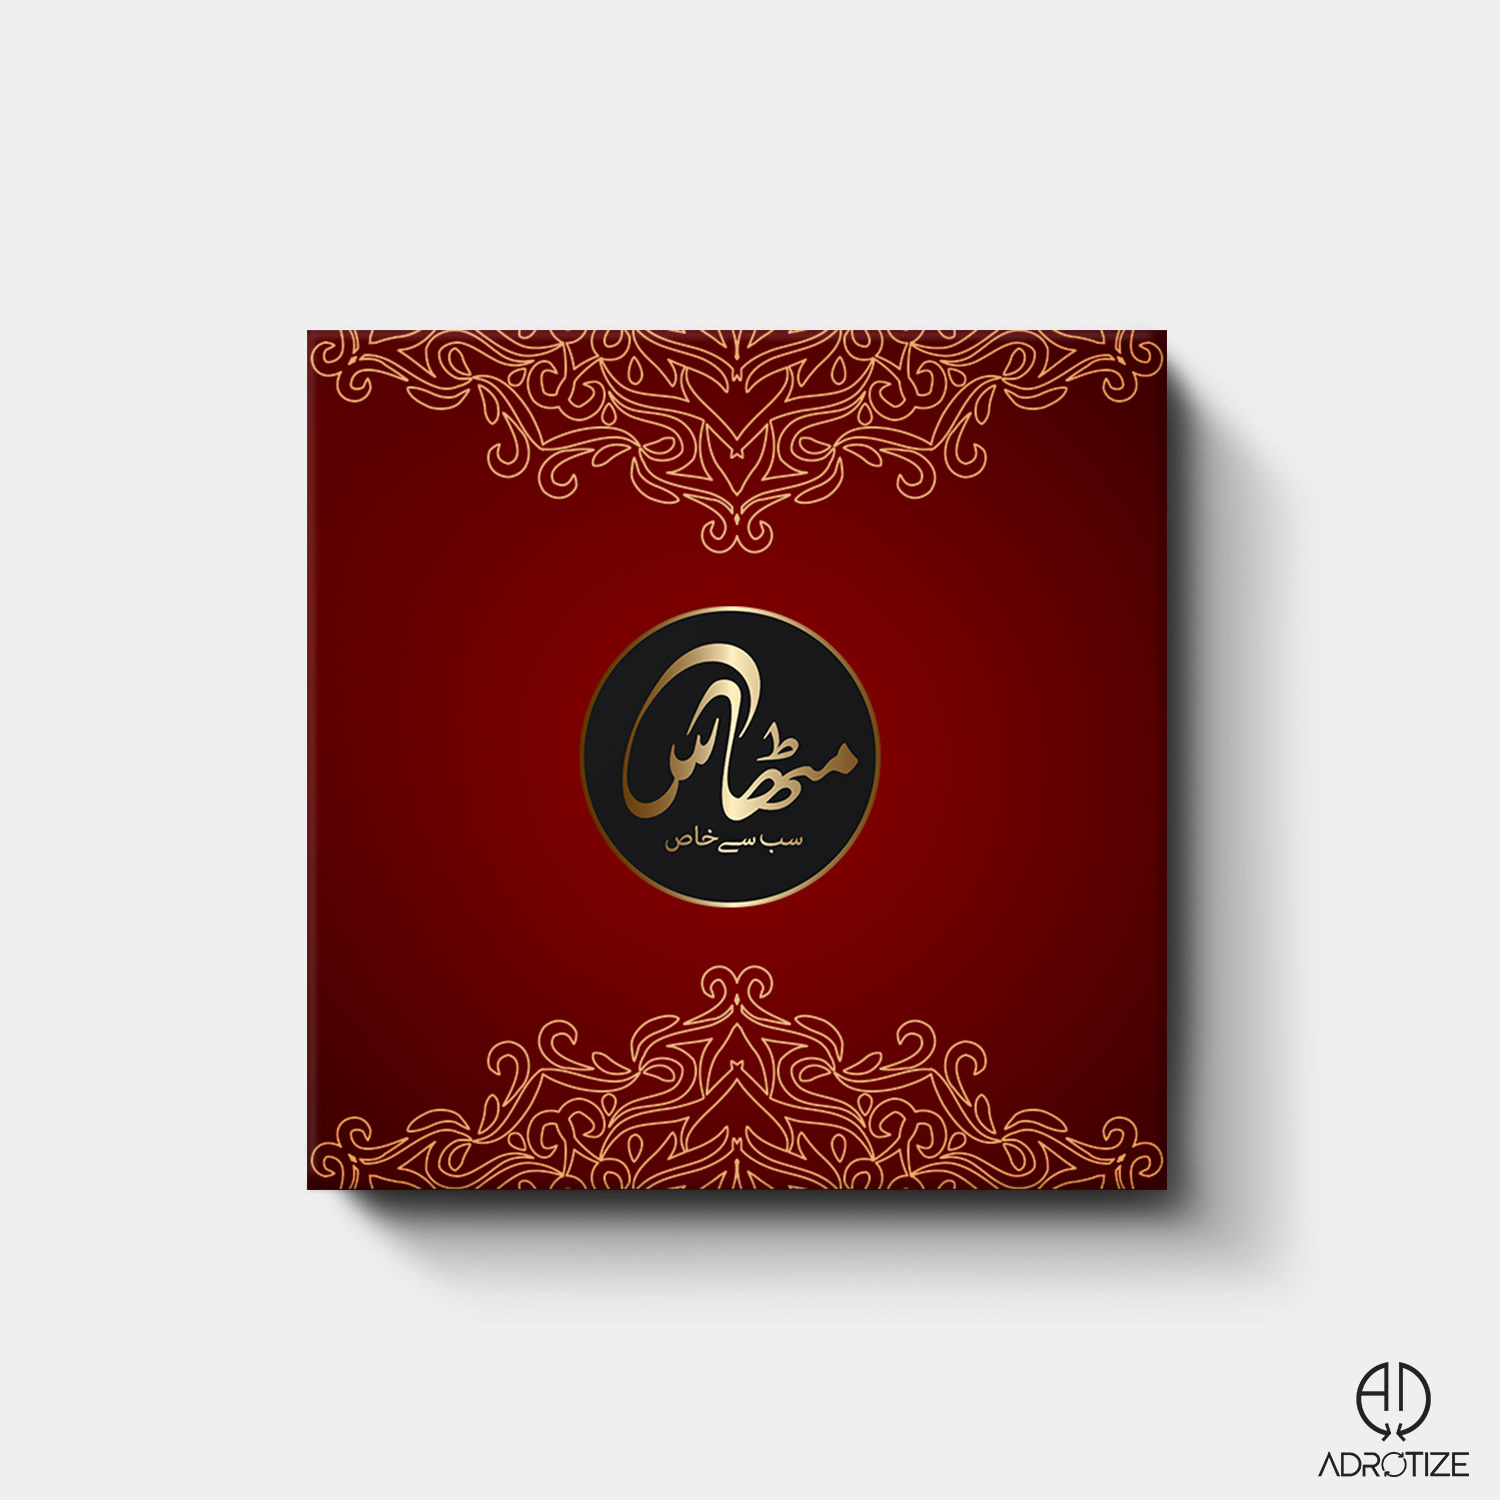 Premium Sweets Box Design - Product Photography - adrotize 22